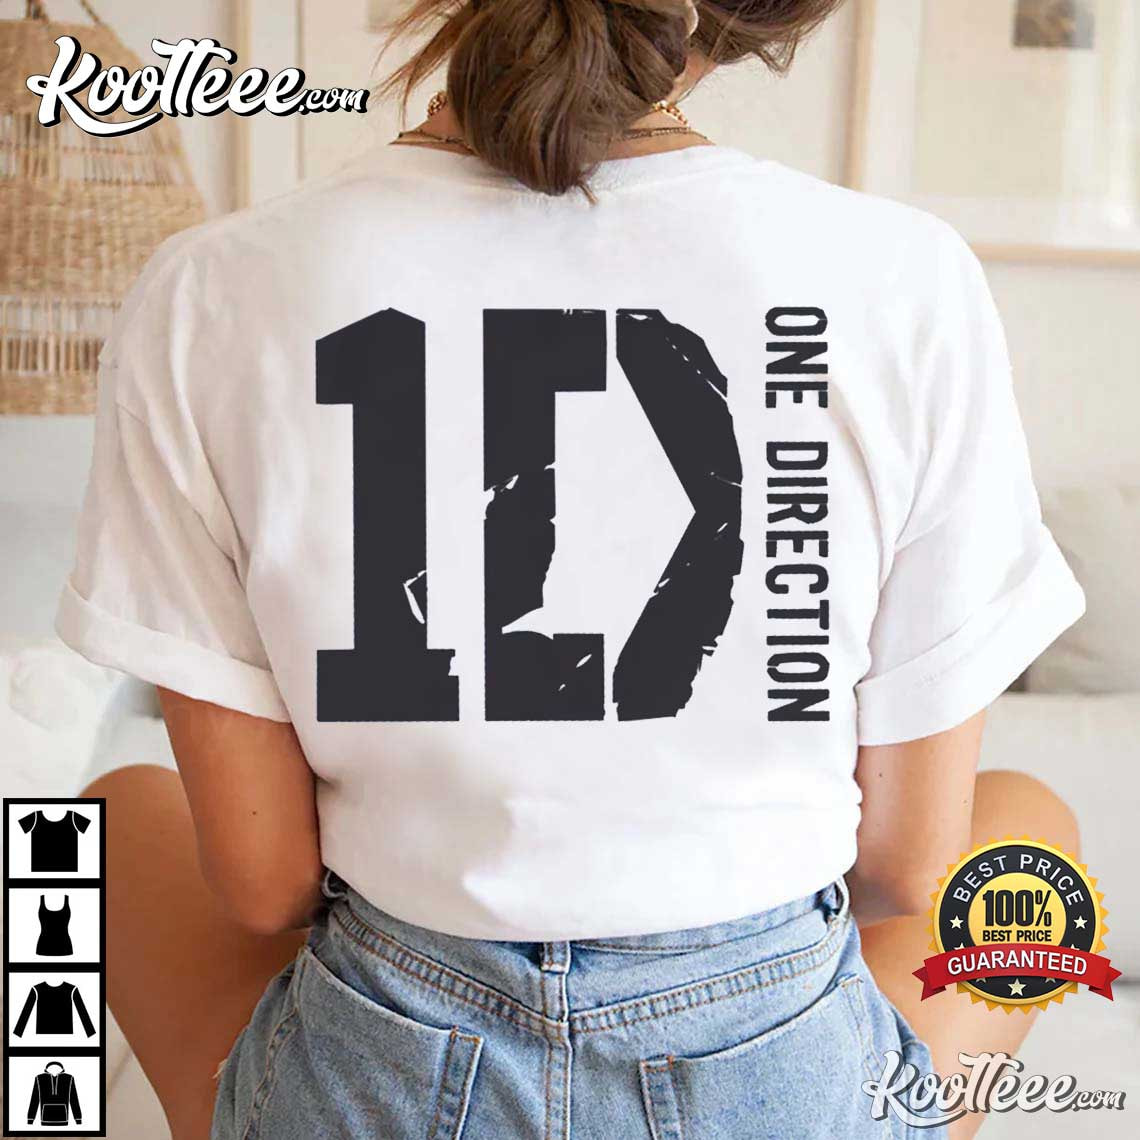 One Direction Up Night Tour 2012 Best T-Shirt